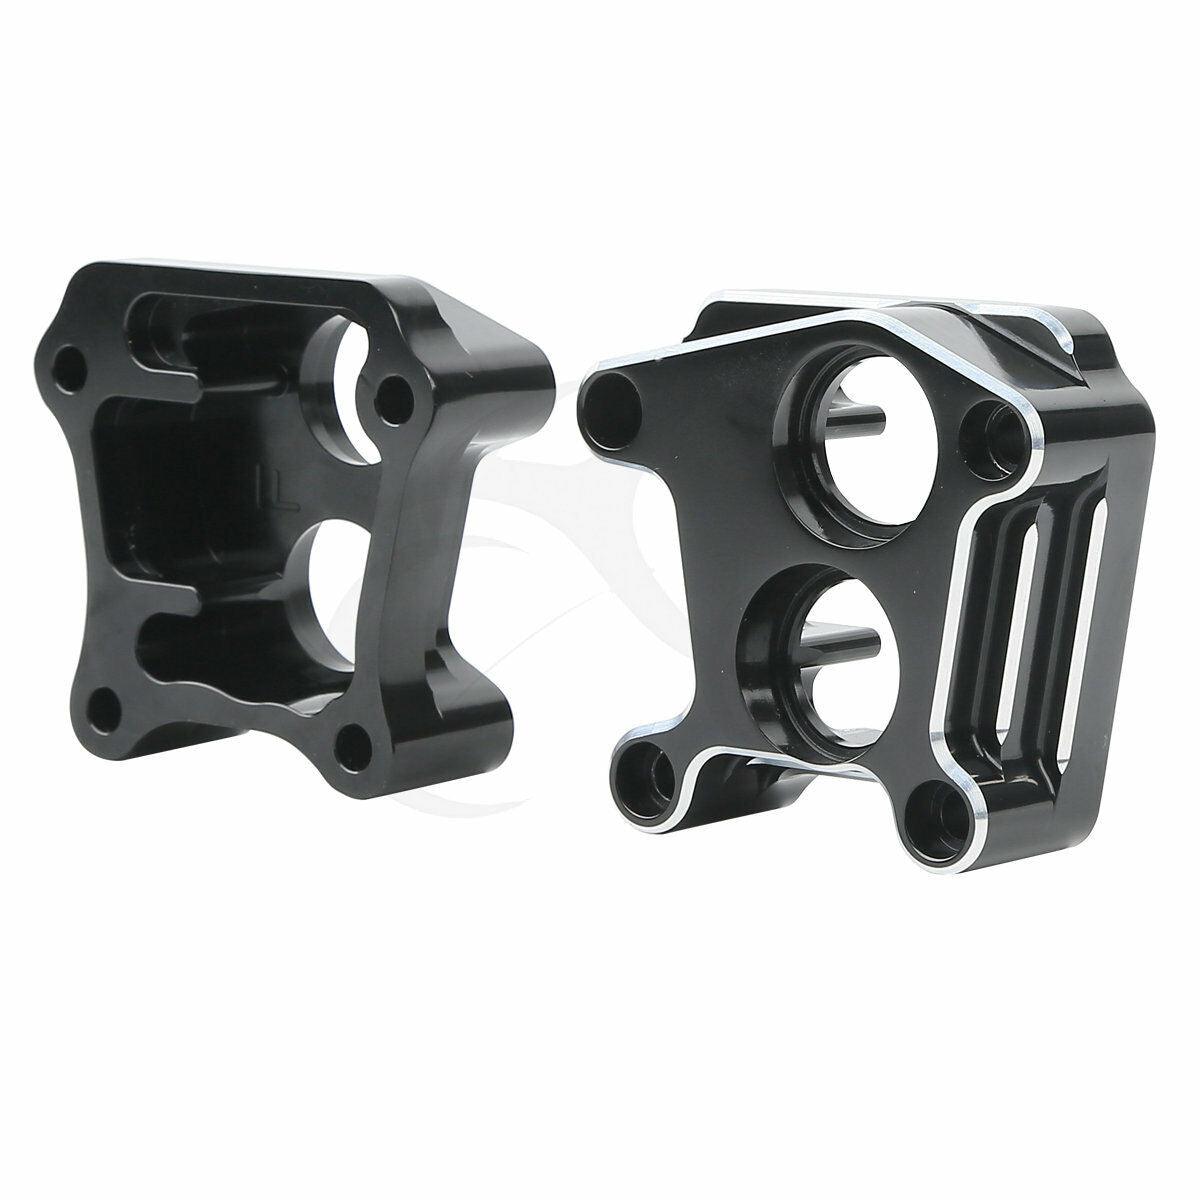 CNC Front Rear Lifter Tappet Block Cover Fit For Harley Touring Dyna Twin Cam US - Moto Life Products